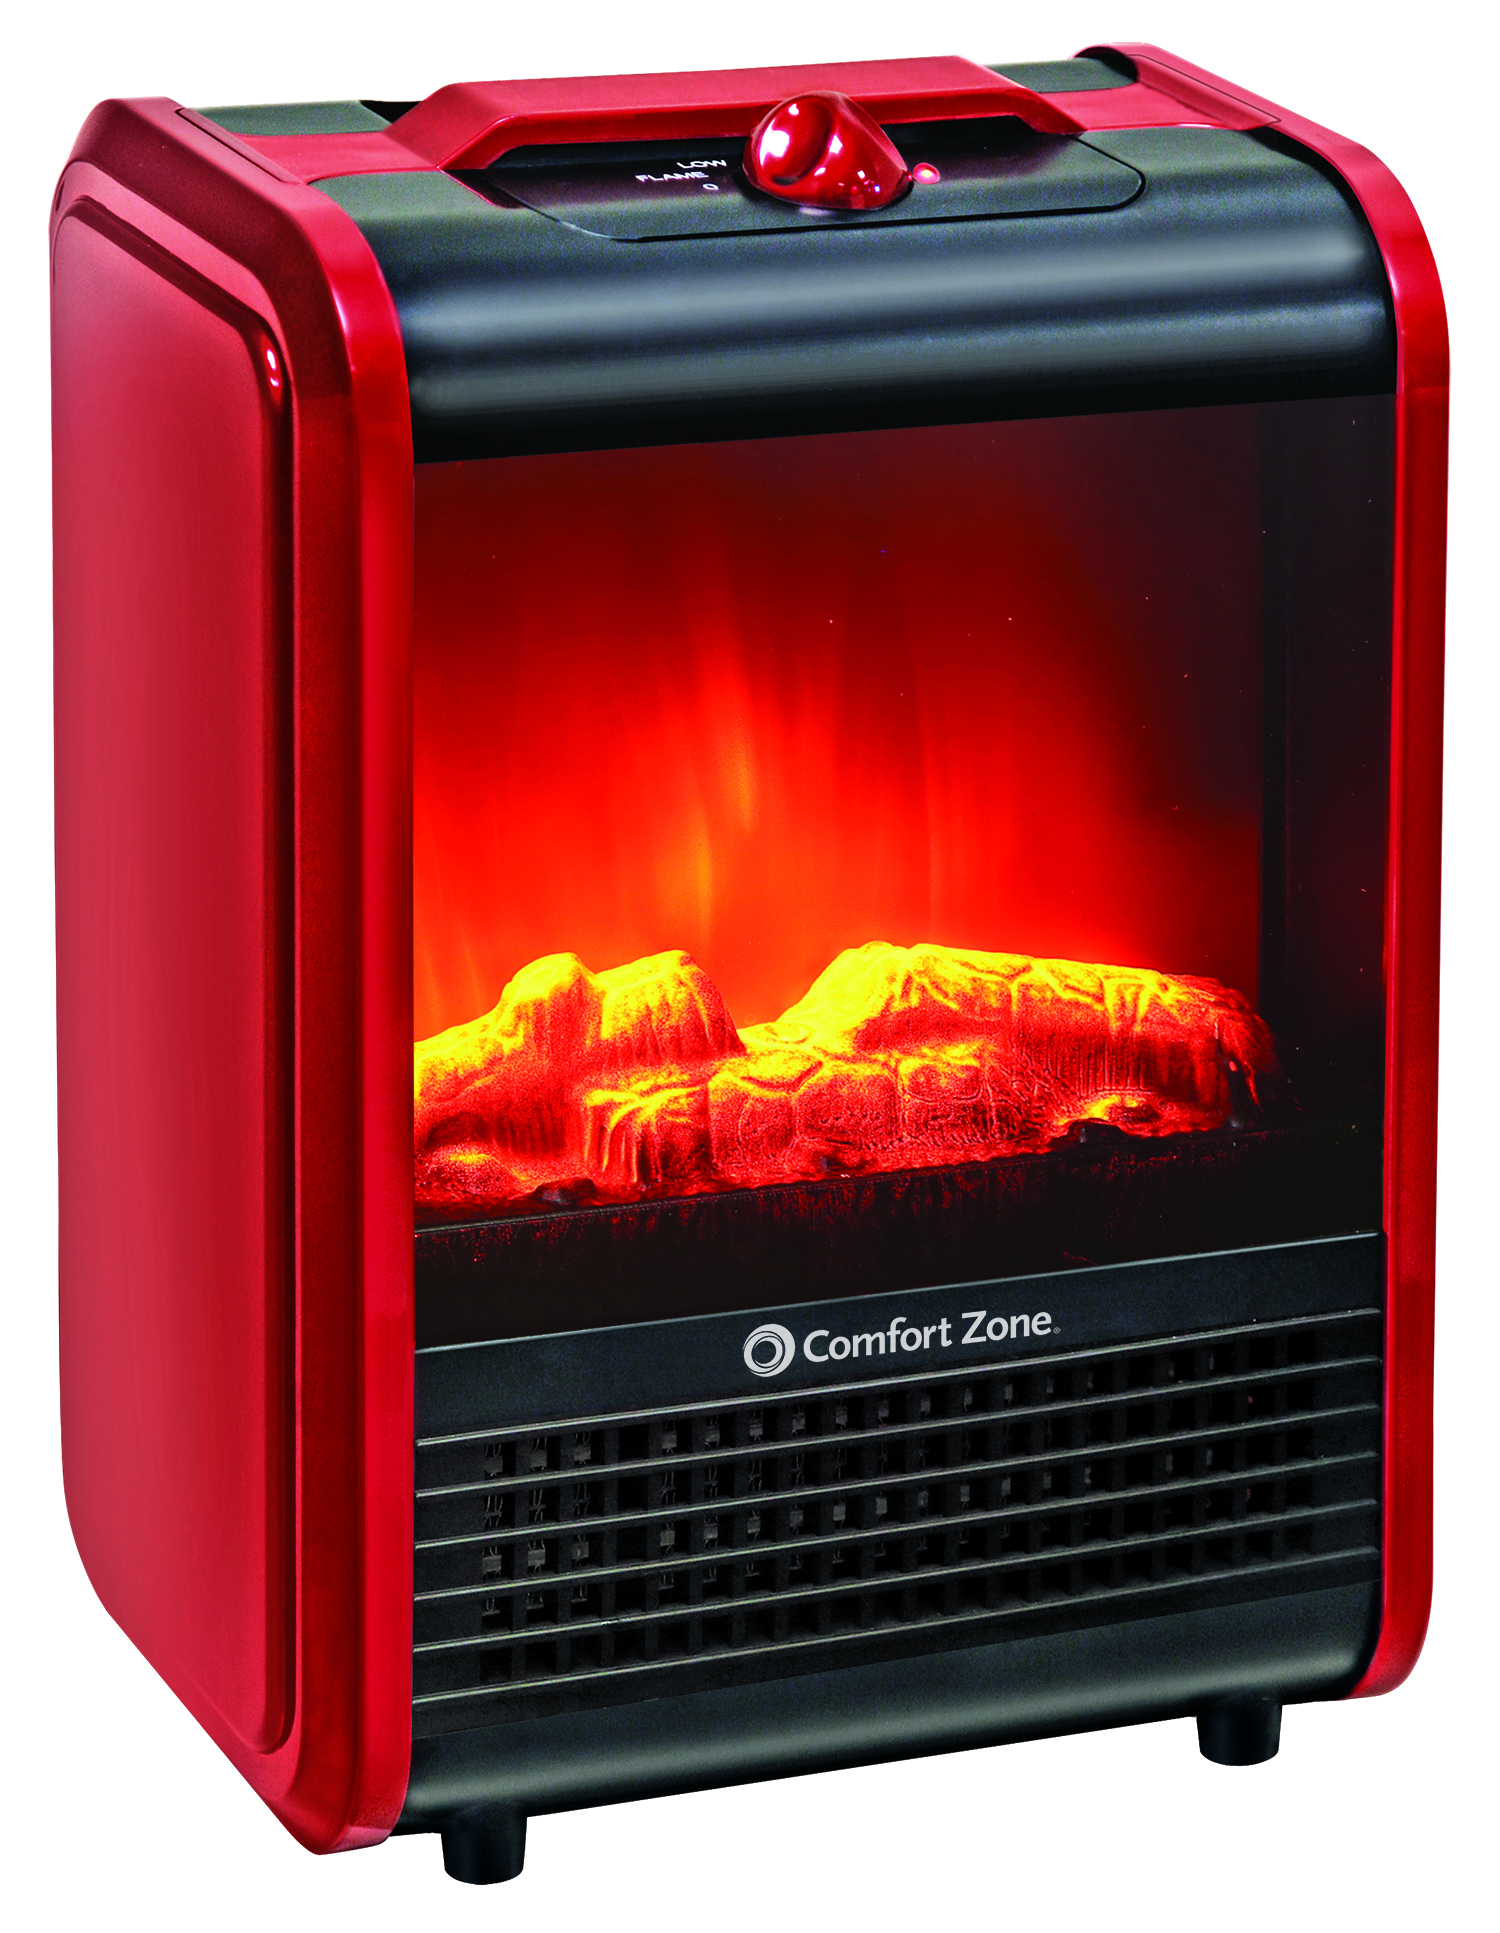 Electric Fireplace with Bookshelf Awesome fort Zone Mini Electric Fireplace Space Heater Red Walmart